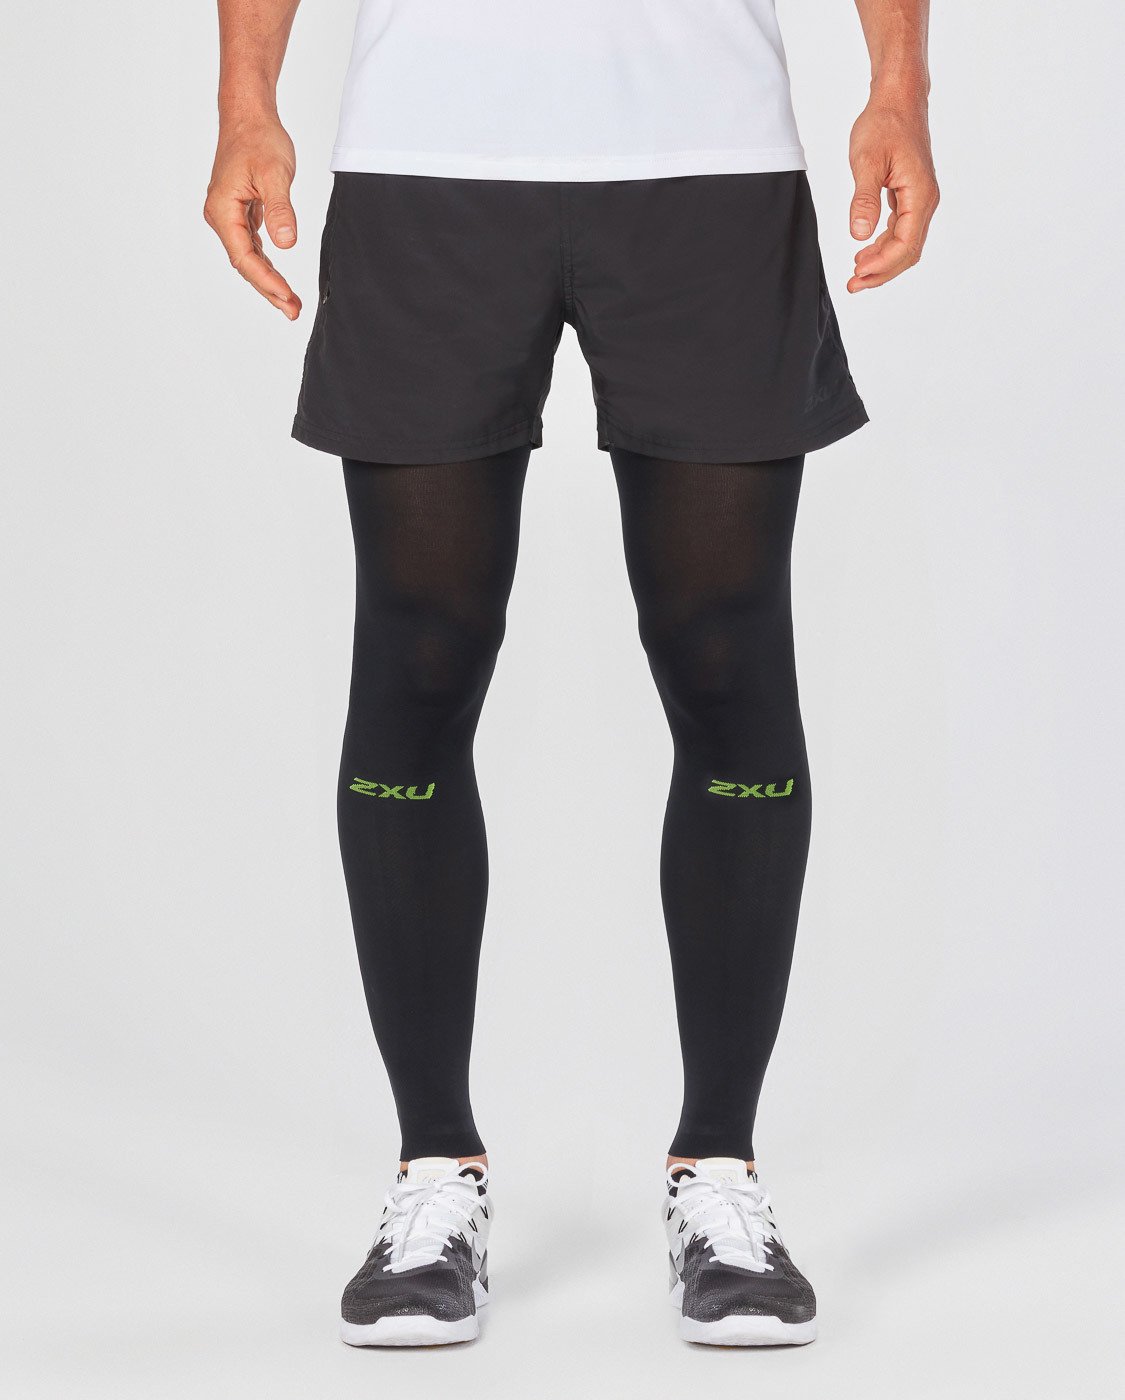 Leg Compression Sleeves for Recovery | 2XU